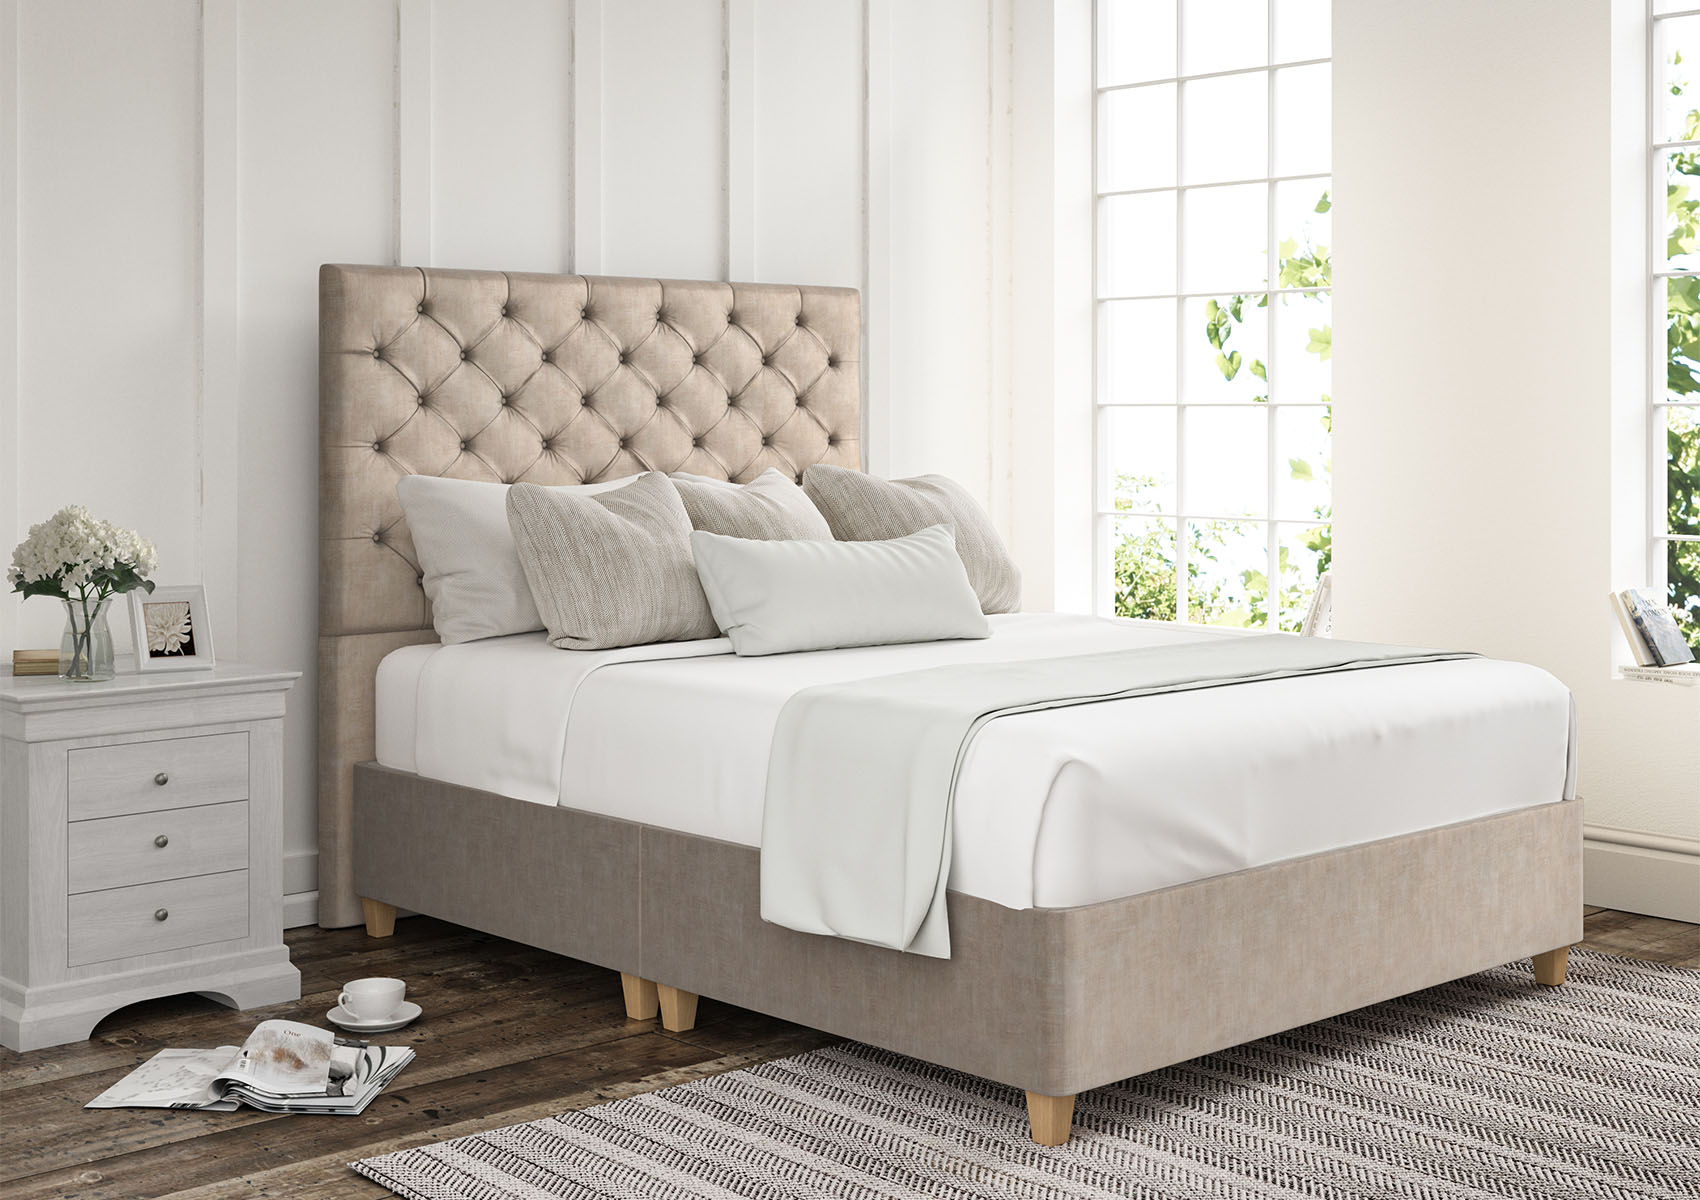 View Chesterfield Teddy Cream Upholstered King Size Divan Bed Time4Sleep information